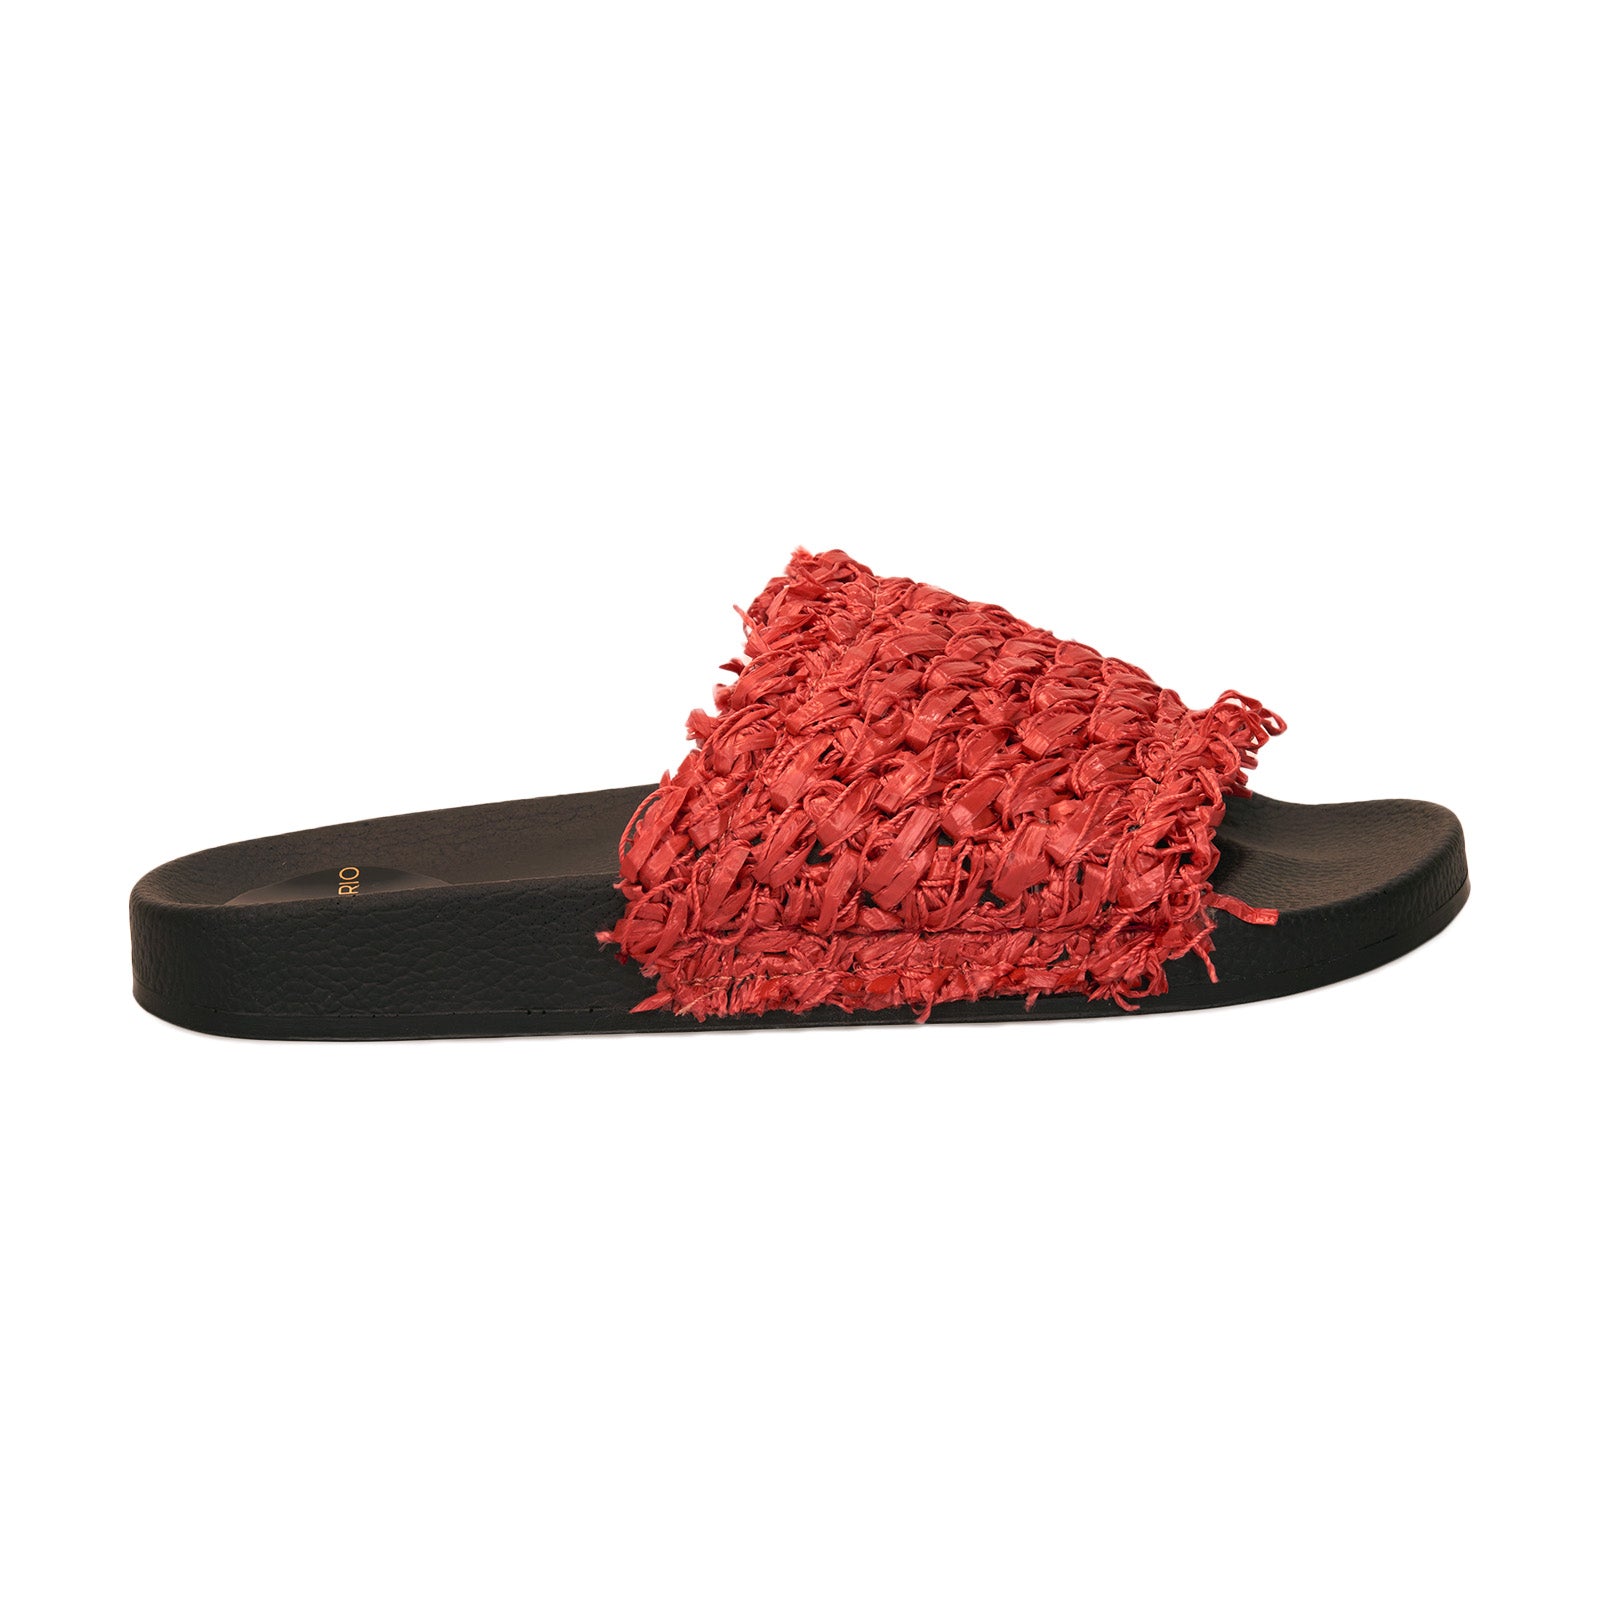 Coco Slide - Poppy Red - Last Pair - Size 36